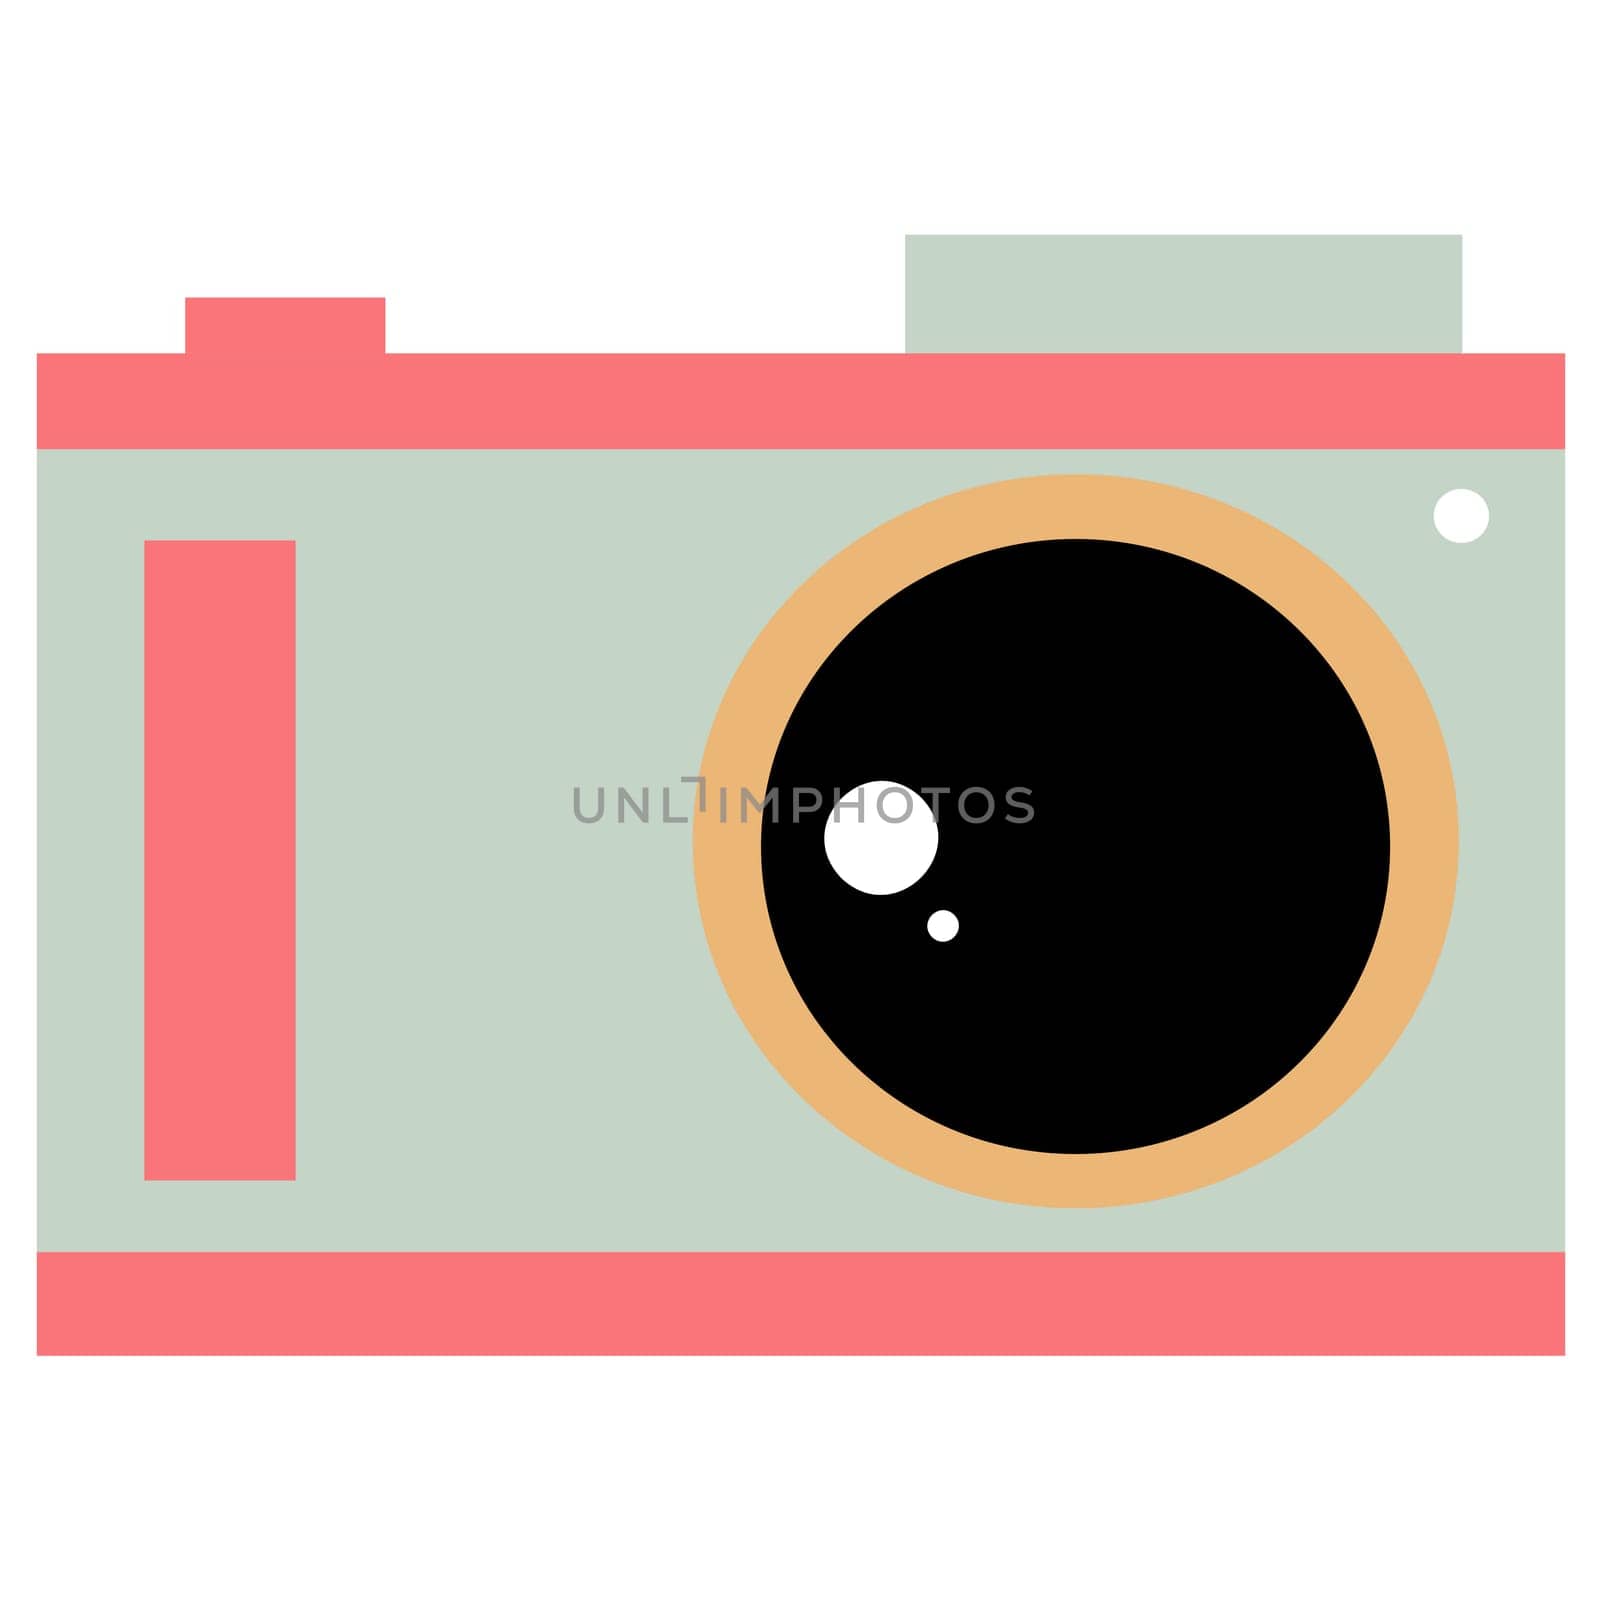 Drawing of vintage camera isolated on white background for usage as an illustration and a decorative element by iamnoonmai